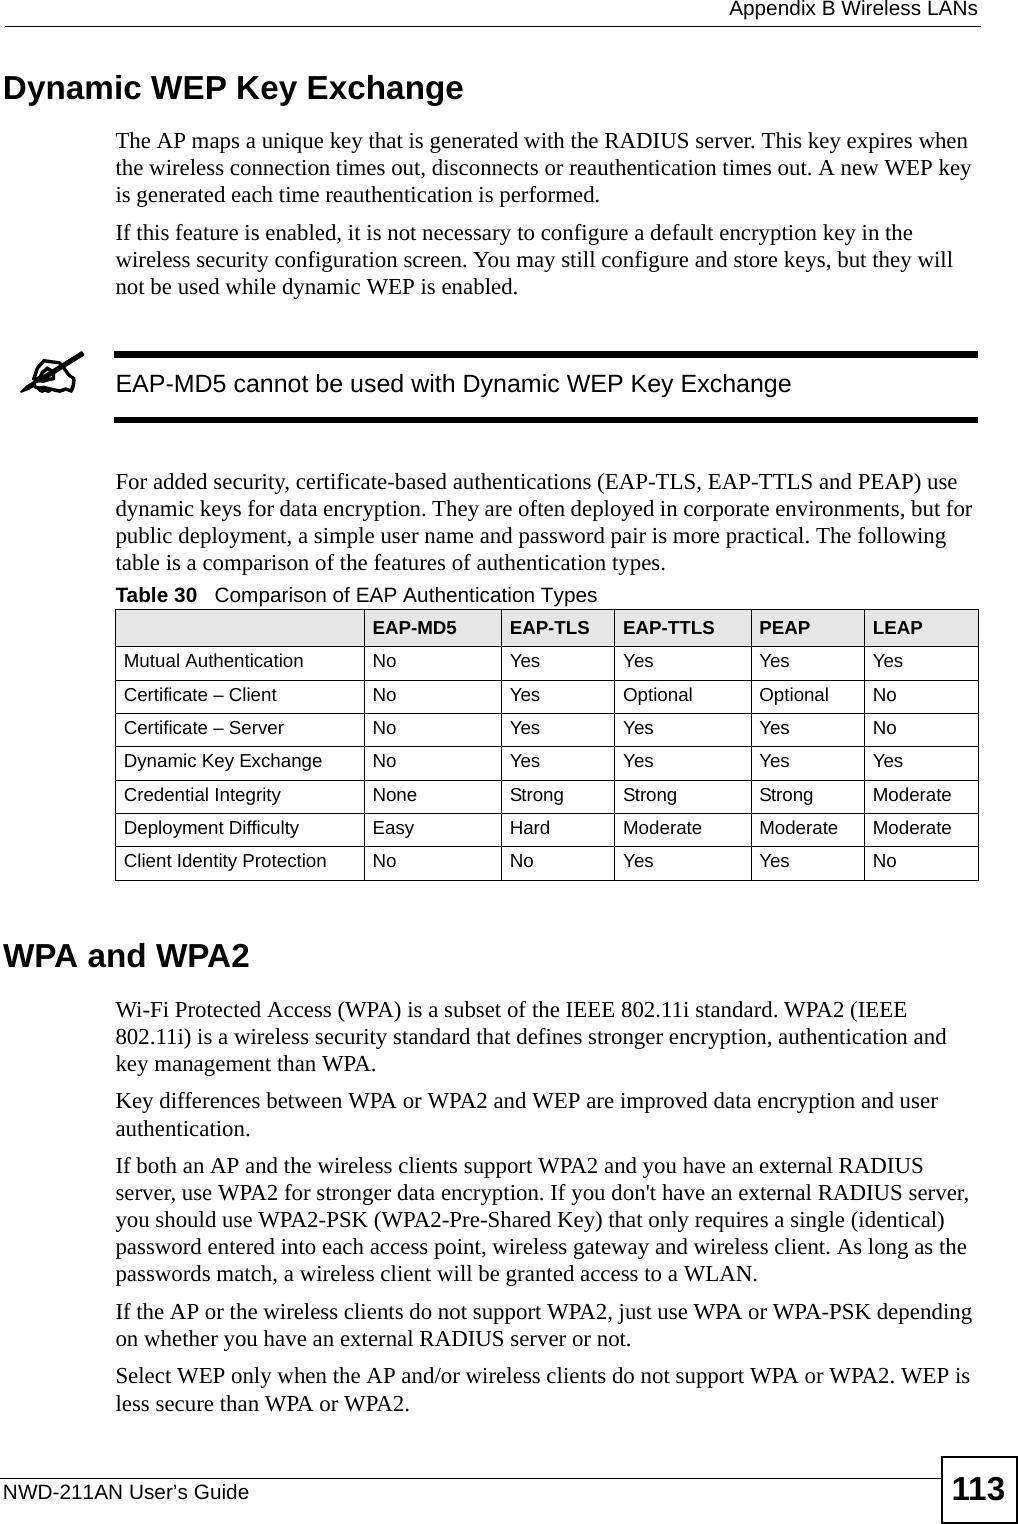  Appendix B Wireless LANsNWD-211AN User’s Guide 113Dynamic WEP Key ExchangeThe AP maps a unique key that is generated with the RADIUS server. This key expires when the wireless connection times out, disconnects or reauthentication times out. A new WEP key is generated each time reauthentication is performed.If this feature is enabled, it is not necessary to configure a default encryption key in the wireless security configuration screen. You may still configure and store keys, but they will not be used while dynamic WEP is enabled.&quot;EAP-MD5 cannot be used with Dynamic WEP Key ExchangeFor added security, certificate-based authentications (EAP-TLS, EAP-TTLS and PEAP) use dynamic keys for data encryption. They are often deployed in corporate environments, but for public deployment, a simple user name and password pair is more practical. The following table is a comparison of the features of authentication types.WPA and WPA2Wi-Fi Protected Access (WPA) is a subset of the IEEE 802.11i standard. WPA2 (IEEE 802.11i) is a wireless security standard that defines stronger encryption, authentication and key management than WPA. Key differences between WPA or WPA2 and WEP are improved data encryption and user authentication.If both an AP and the wireless clients support WPA2 and you have an external RADIUS server, use WPA2 for stronger data encryption. If you don&apos;t have an external RADIUS server, you should use WPA2-PSK (WPA2-Pre-Shared Key) that only requires a single (identical) password entered into each access point, wireless gateway and wireless client. As long as the passwords match, a wireless client will be granted access to a WLAN. If the AP or the wireless clients do not support WPA2, just use WPA or WPA-PSK depending on whether you have an external RADIUS server or not.Select WEP only when the AP and/or wireless clients do not support WPA or WPA2. WEP is less secure than WPA or WPA2.Table 30   Comparison of EAP Authentication TypesEAP-MD5 EAP-TLS EAP-TTLS PEAP LEAPMutual Authentication No Yes Yes Yes YesCertificate – Client No Yes Optional Optional NoCertificate – Server No Yes Yes Yes NoDynamic Key Exchange No Yes Yes Yes YesCredential Integrity None Strong Strong Strong ModerateDeployment Difficulty Easy Hard Moderate Moderate ModerateClient Identity Protection No No Yes Yes No